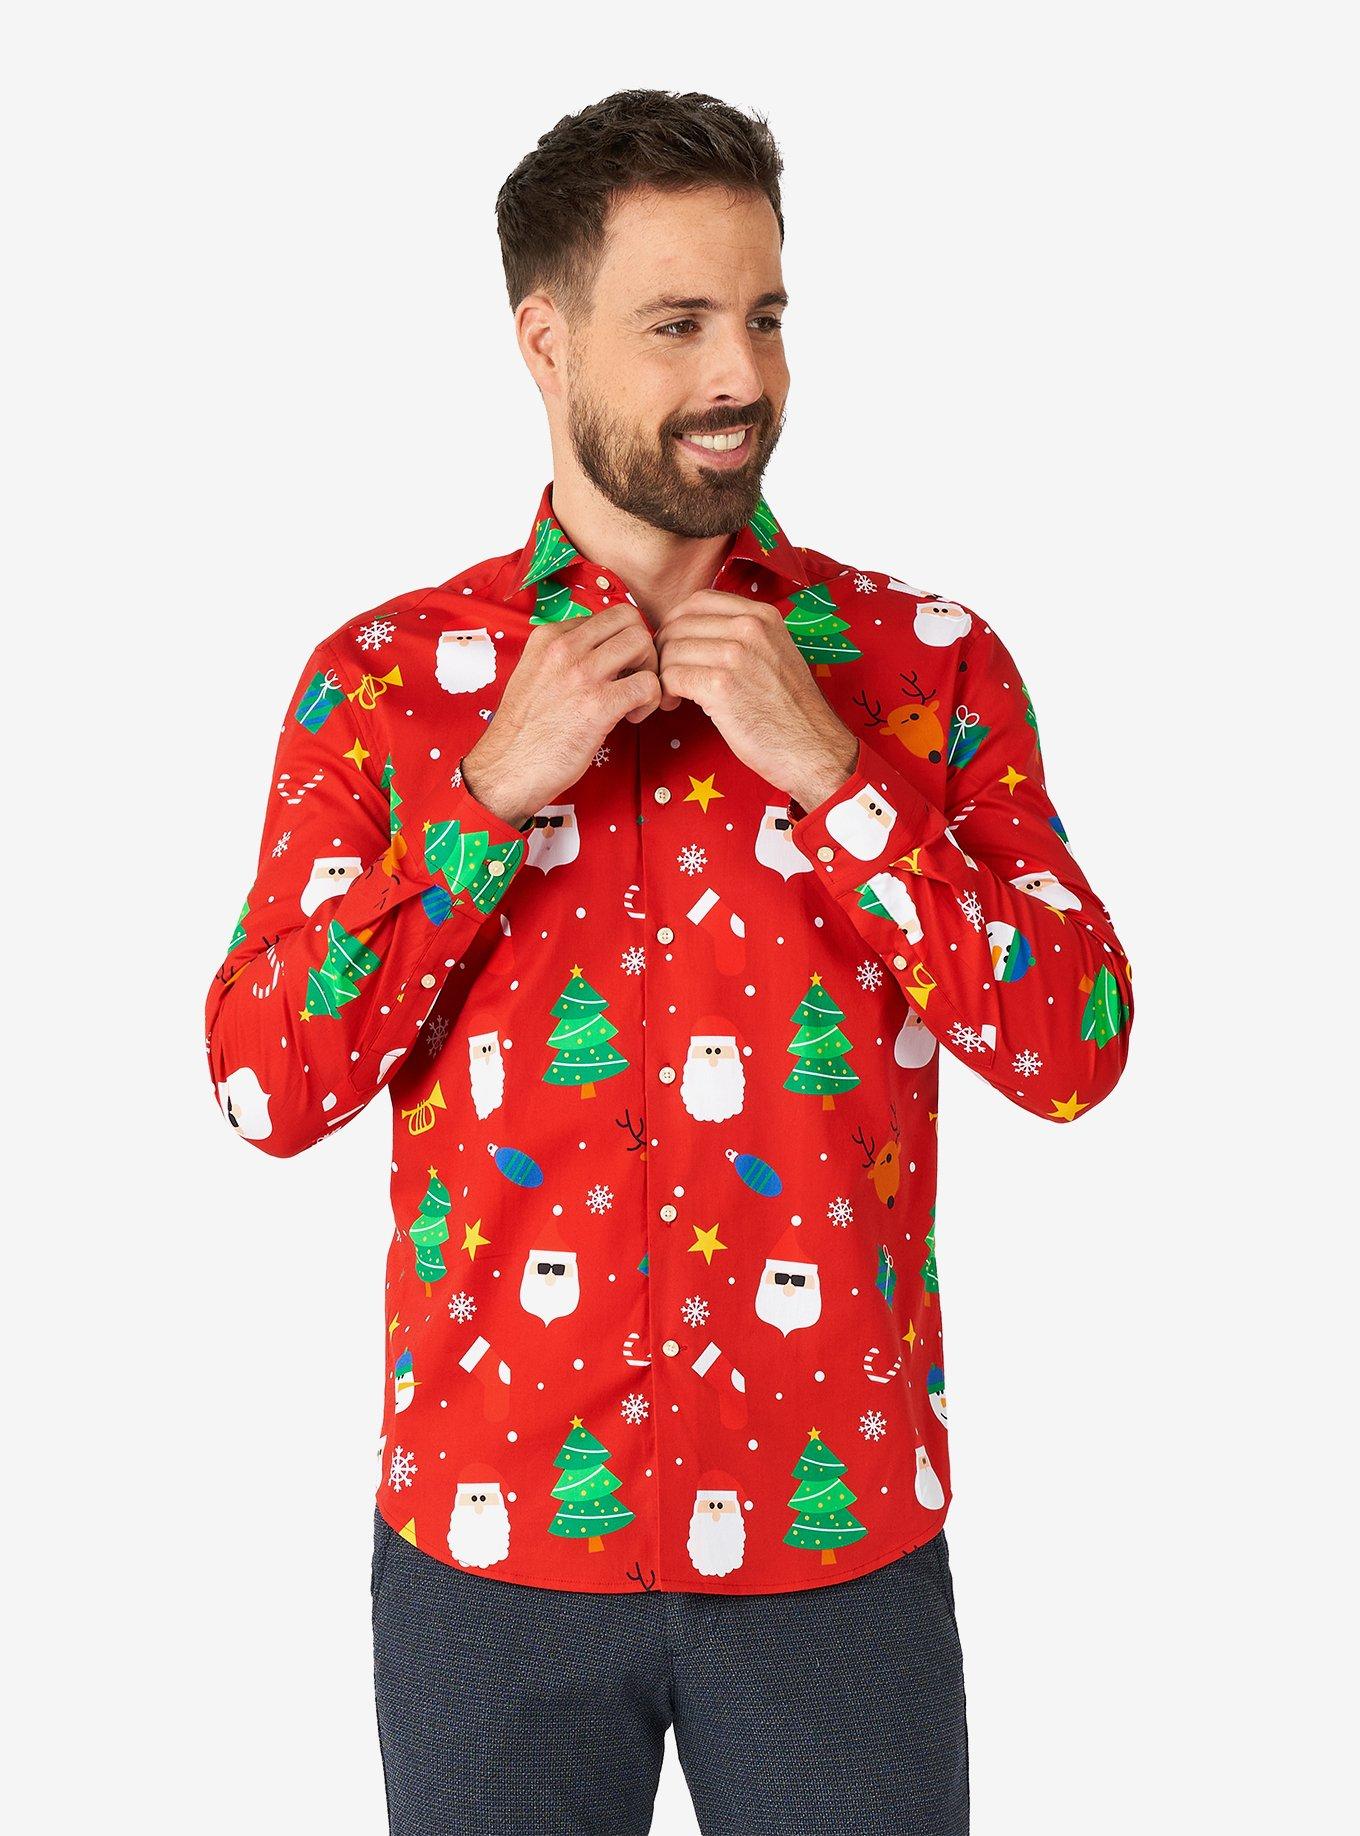 Festivity Red Long Sleeve Button-Up Shirt, RED, hi-res